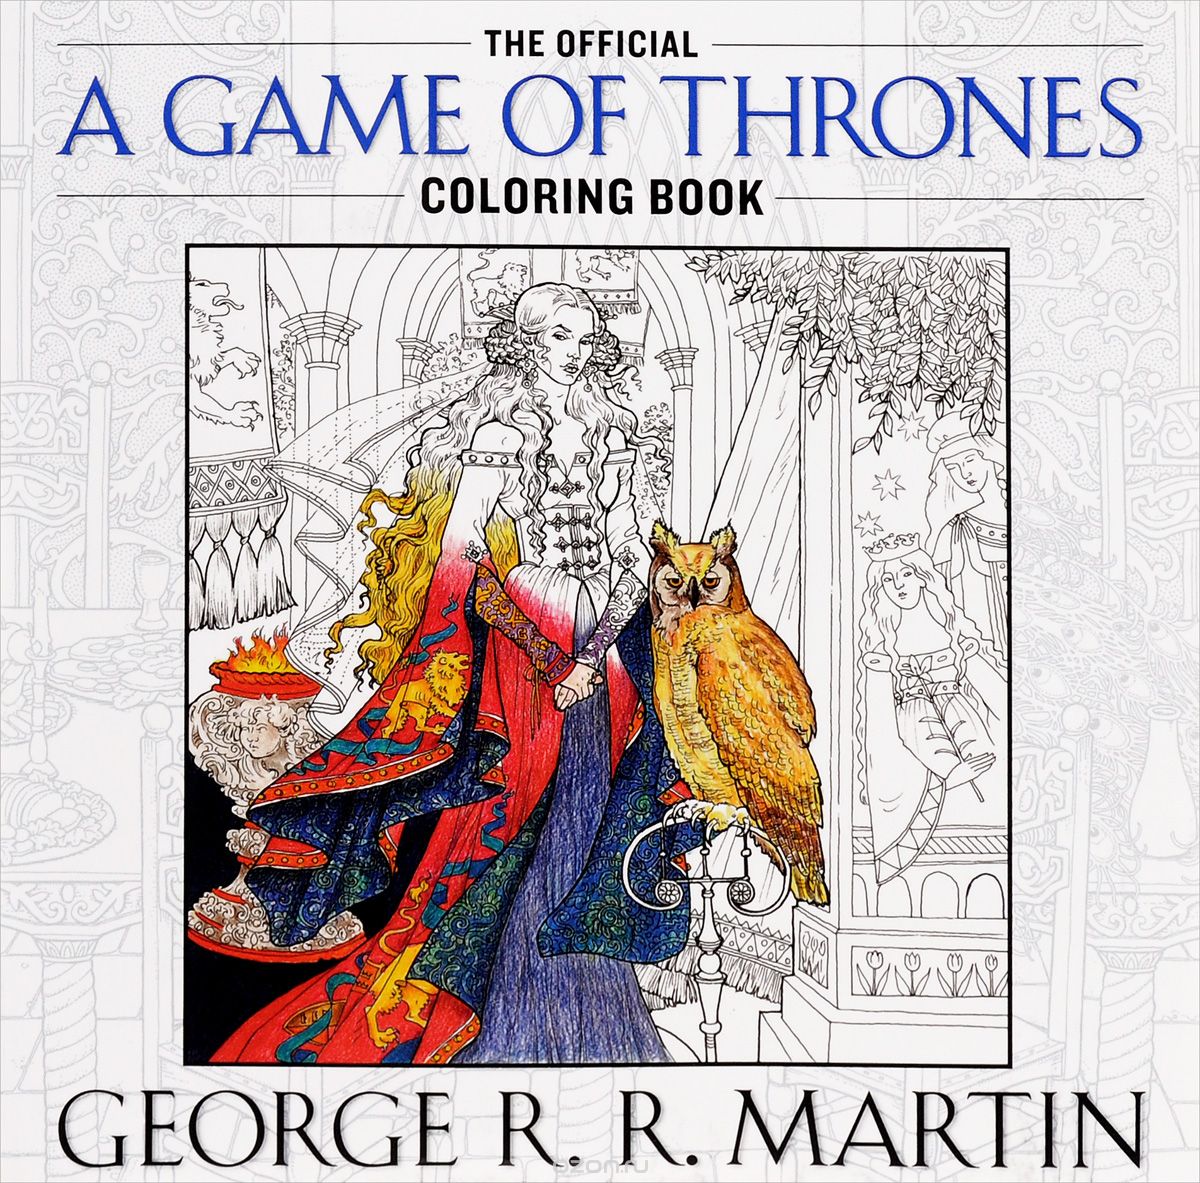 Скачать книгу "A Game of Thrones: The Official Coloring Book"